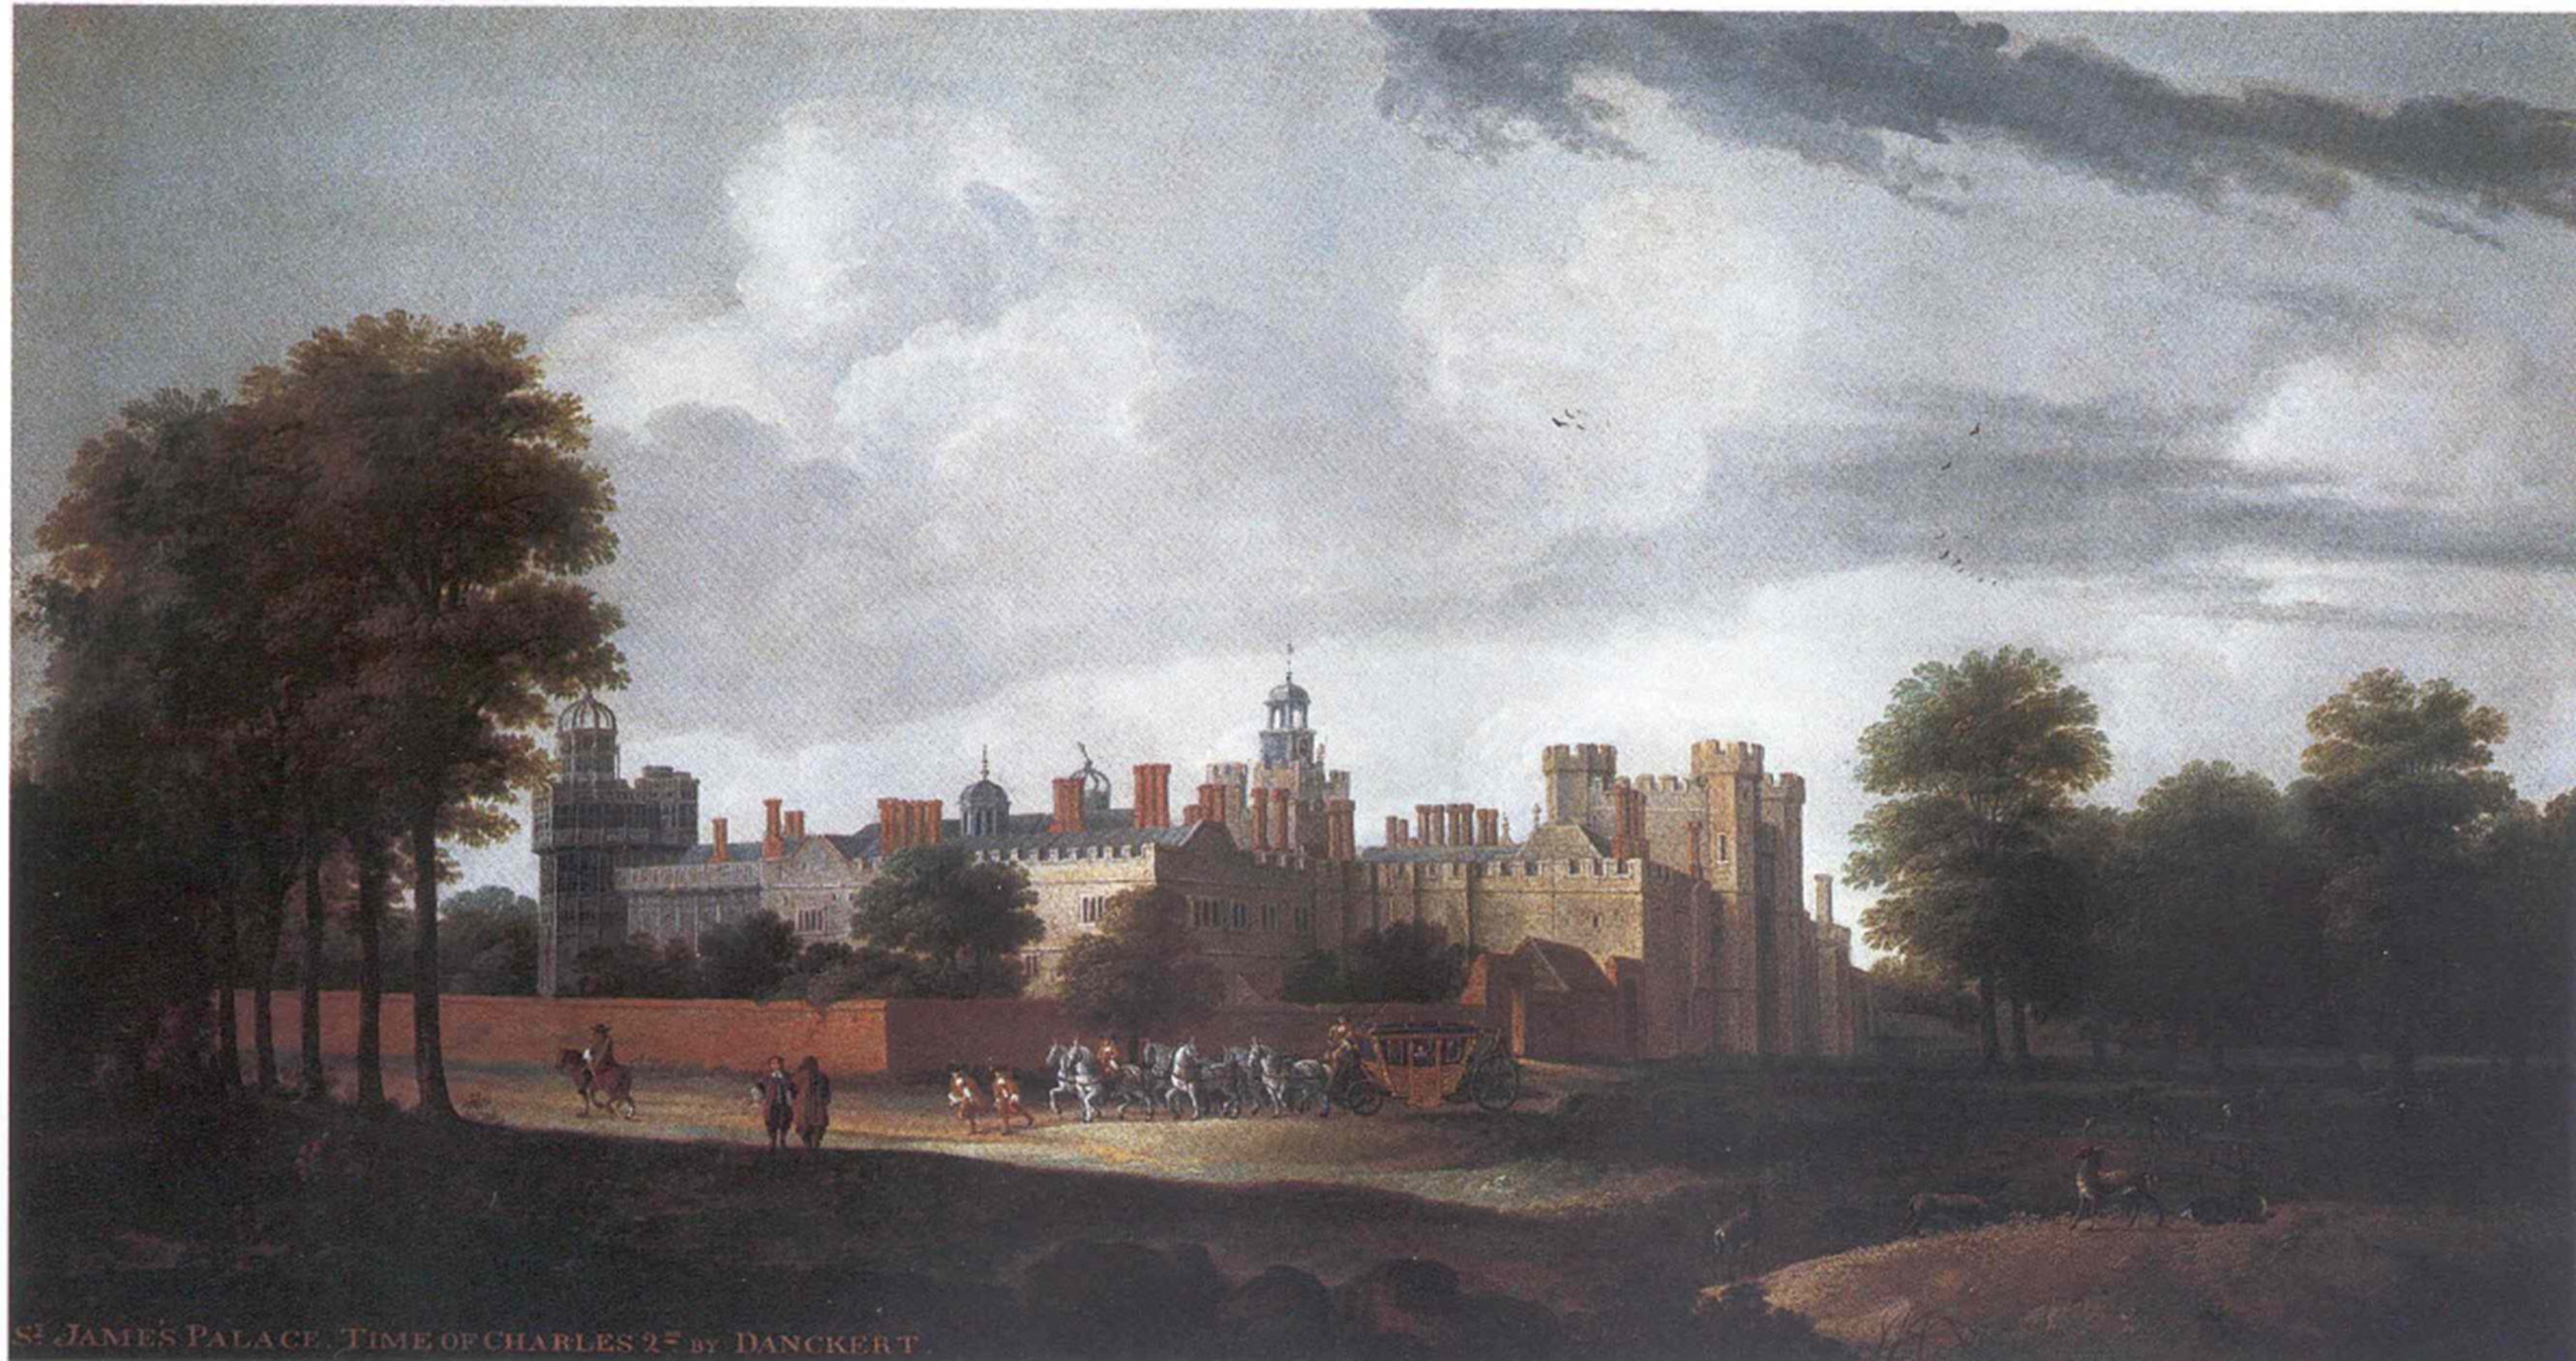 Nonsuch palace